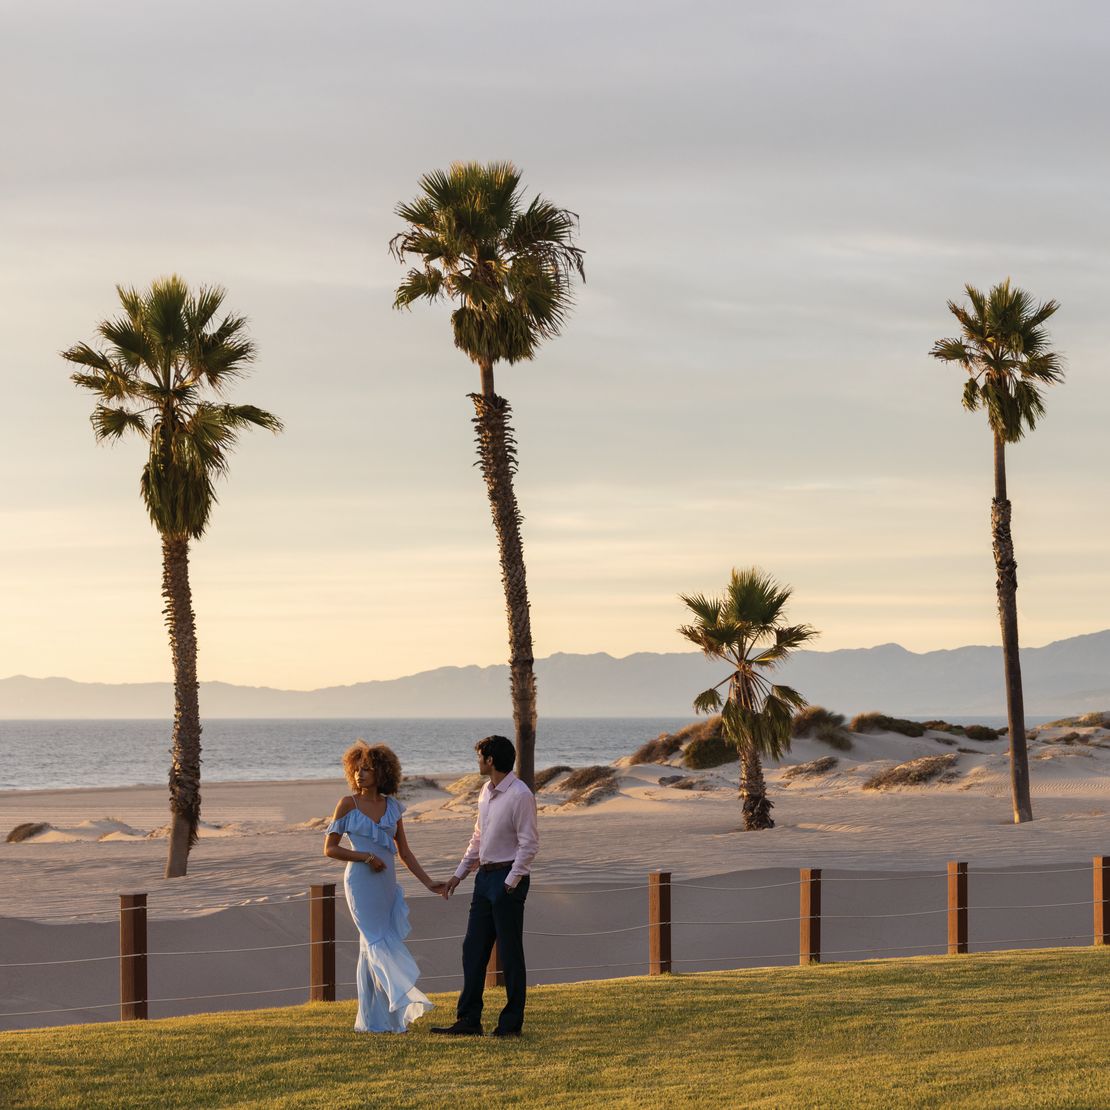 Couple Enjoying a Romantic Day at the Beach with Palm Trees-transition